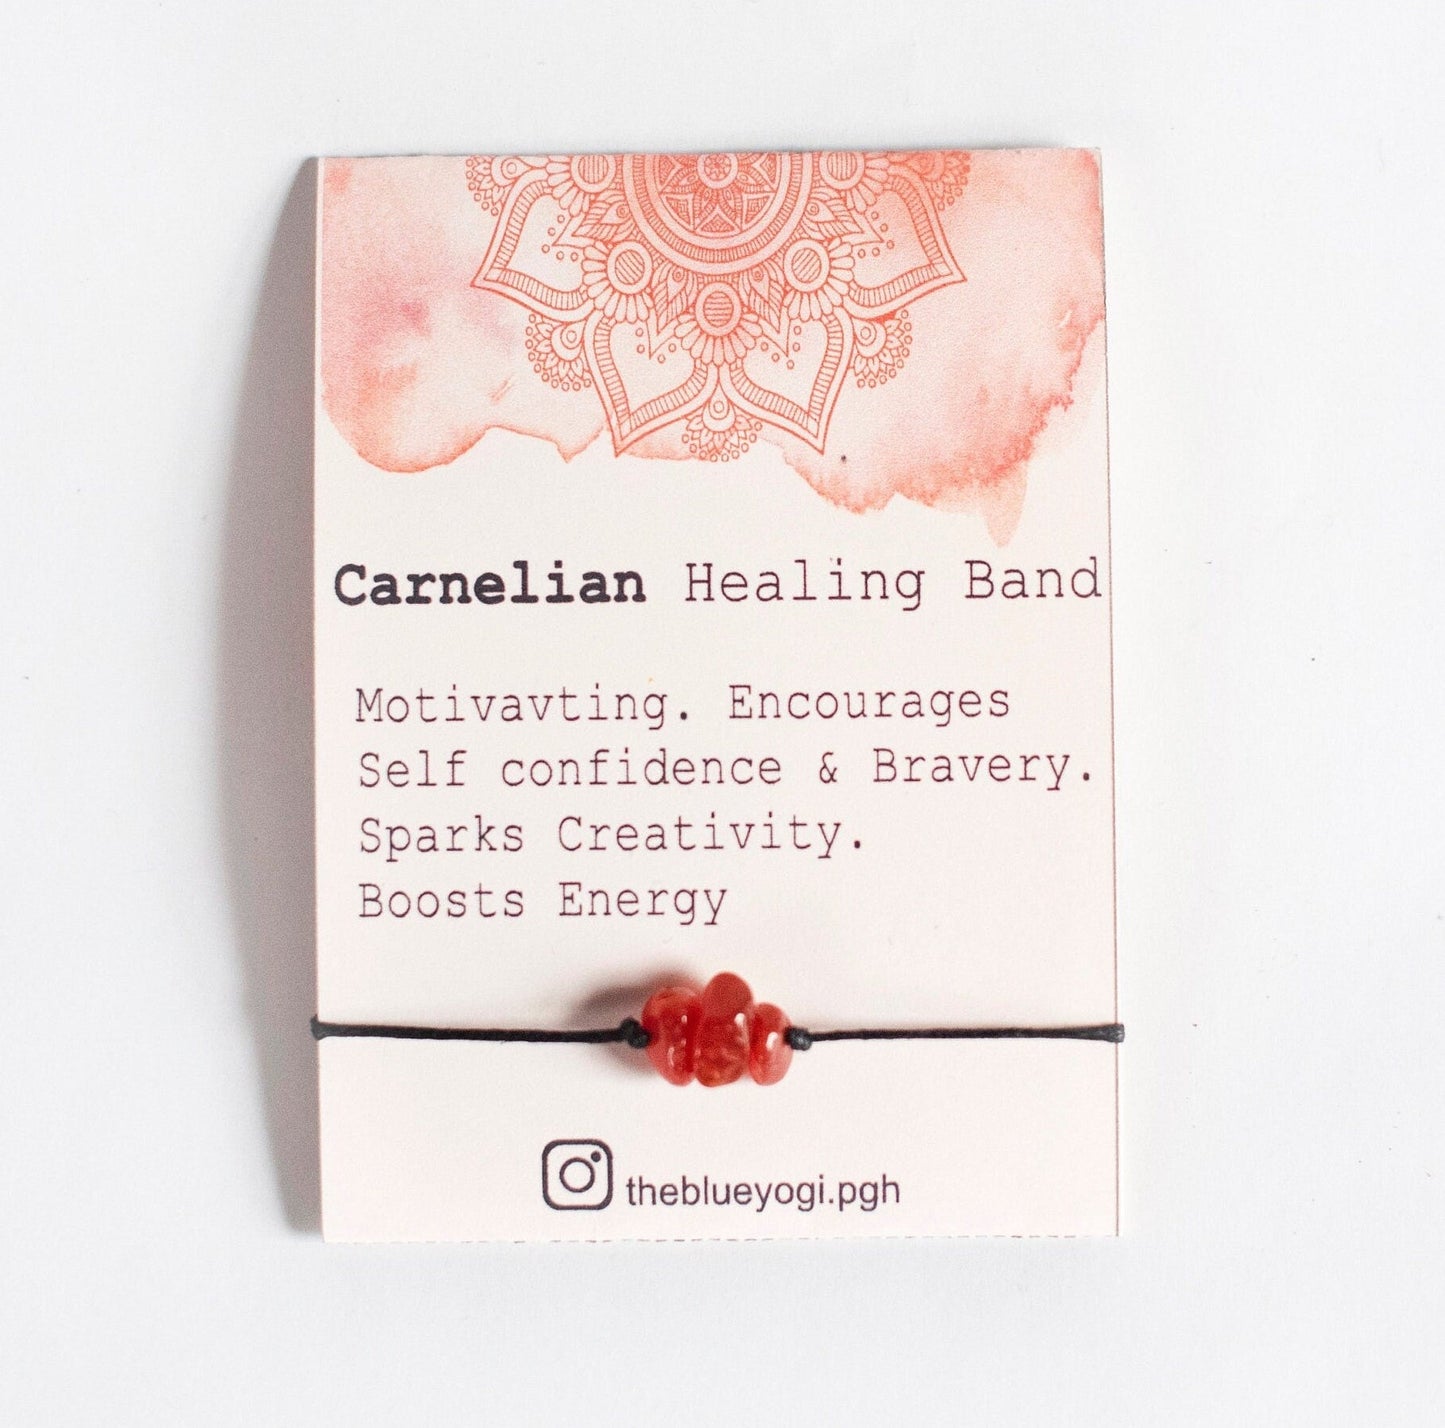 Carnelian Healing Band with an Affirmation